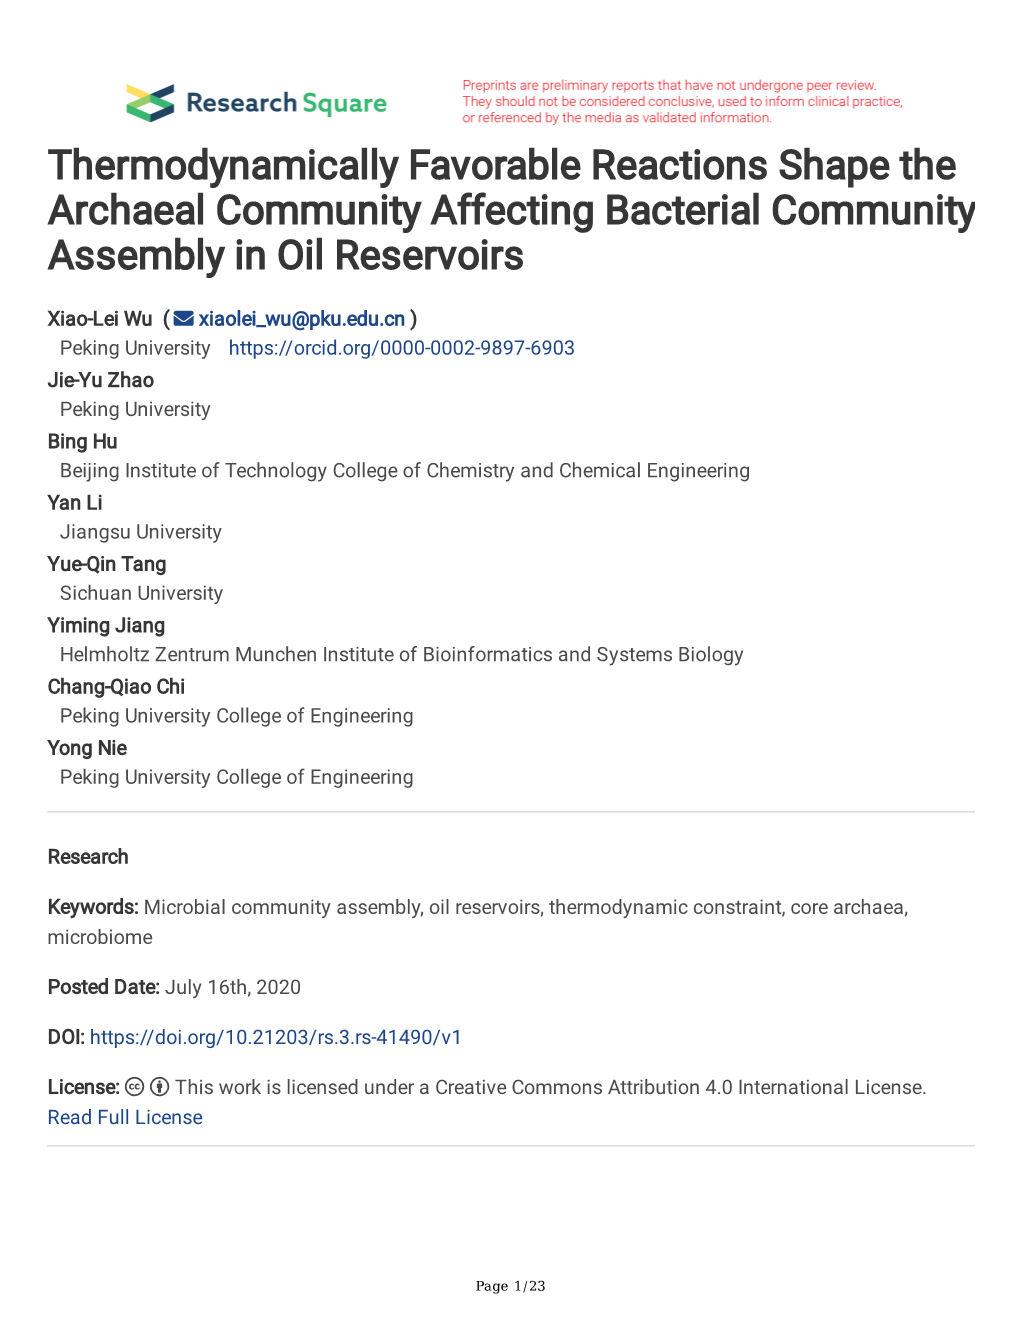 Thermodynamically Favorable Reactions Shape the Archaeal Community Affecting Bacterial Community Assembly in Oil Reservoirs